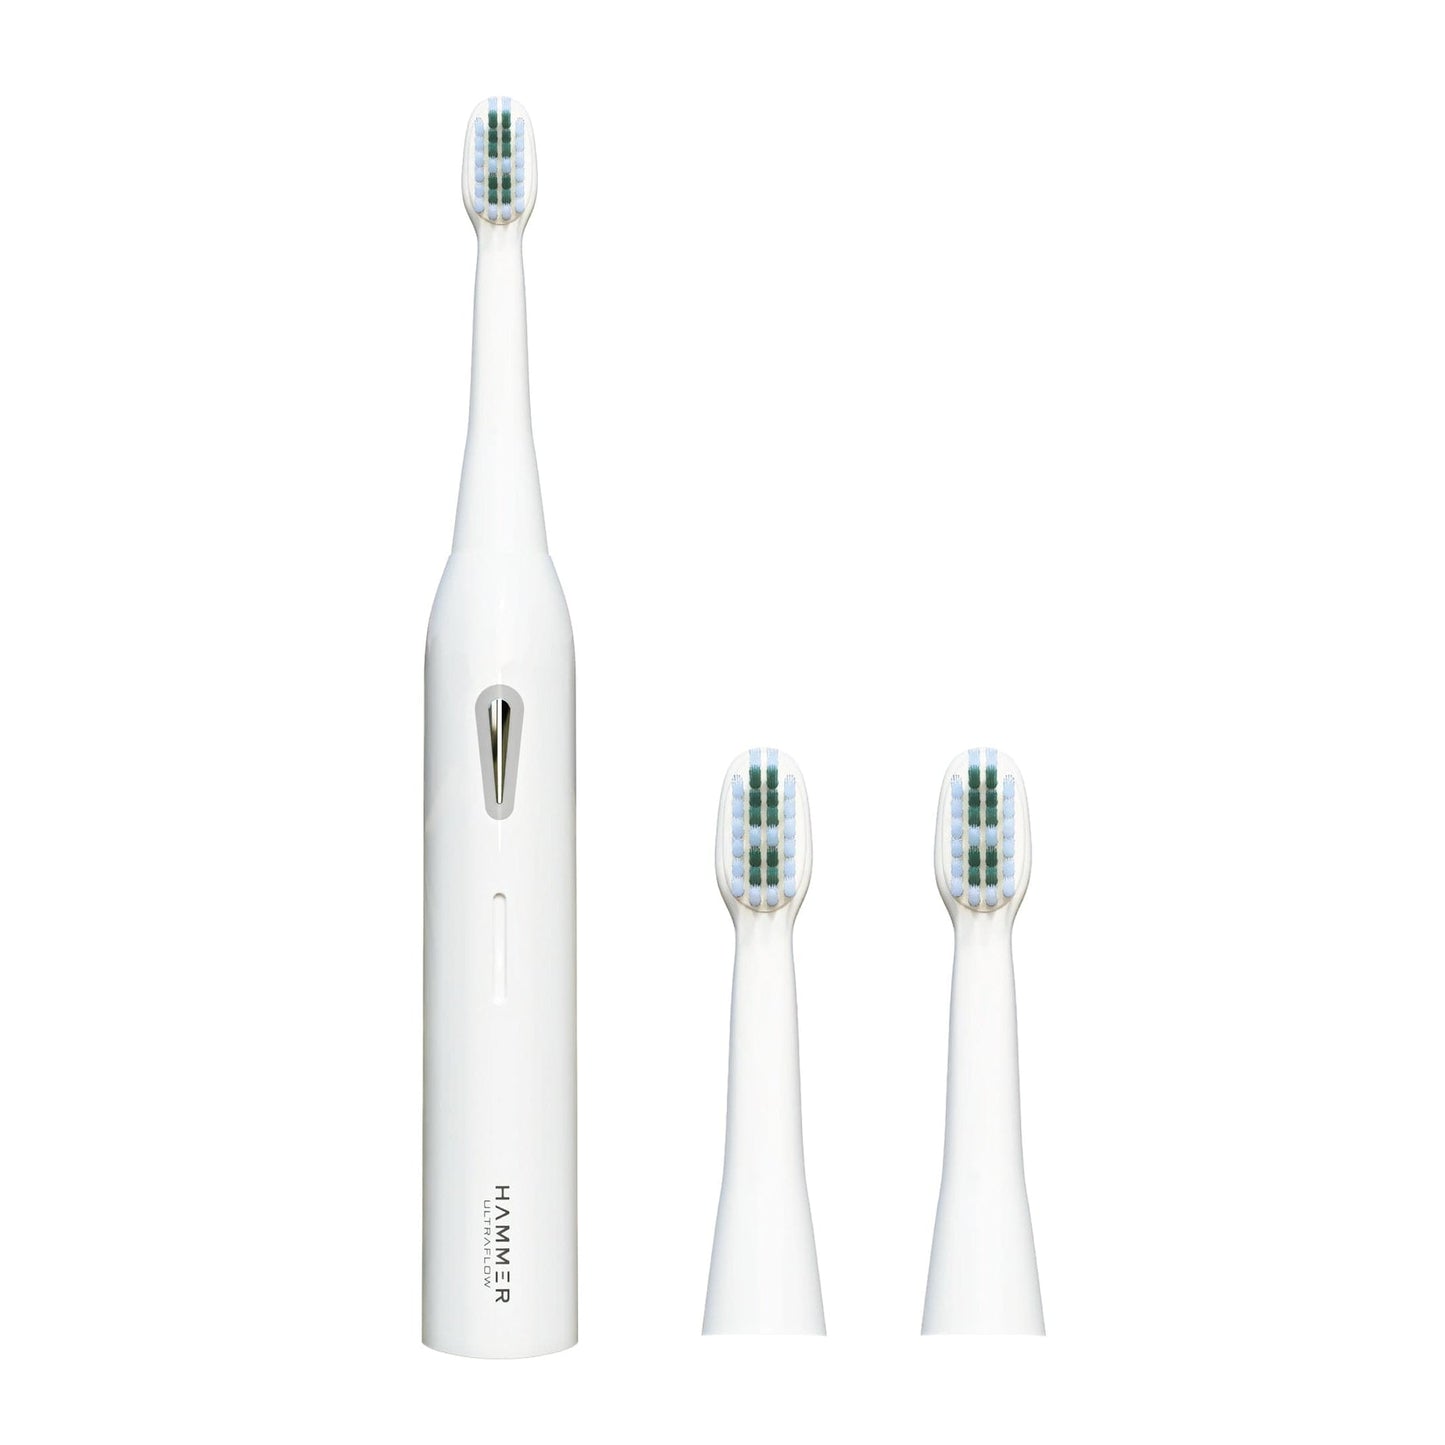 Ultra Flow - Electric Toothbrush with 2 Extra Brush Heads